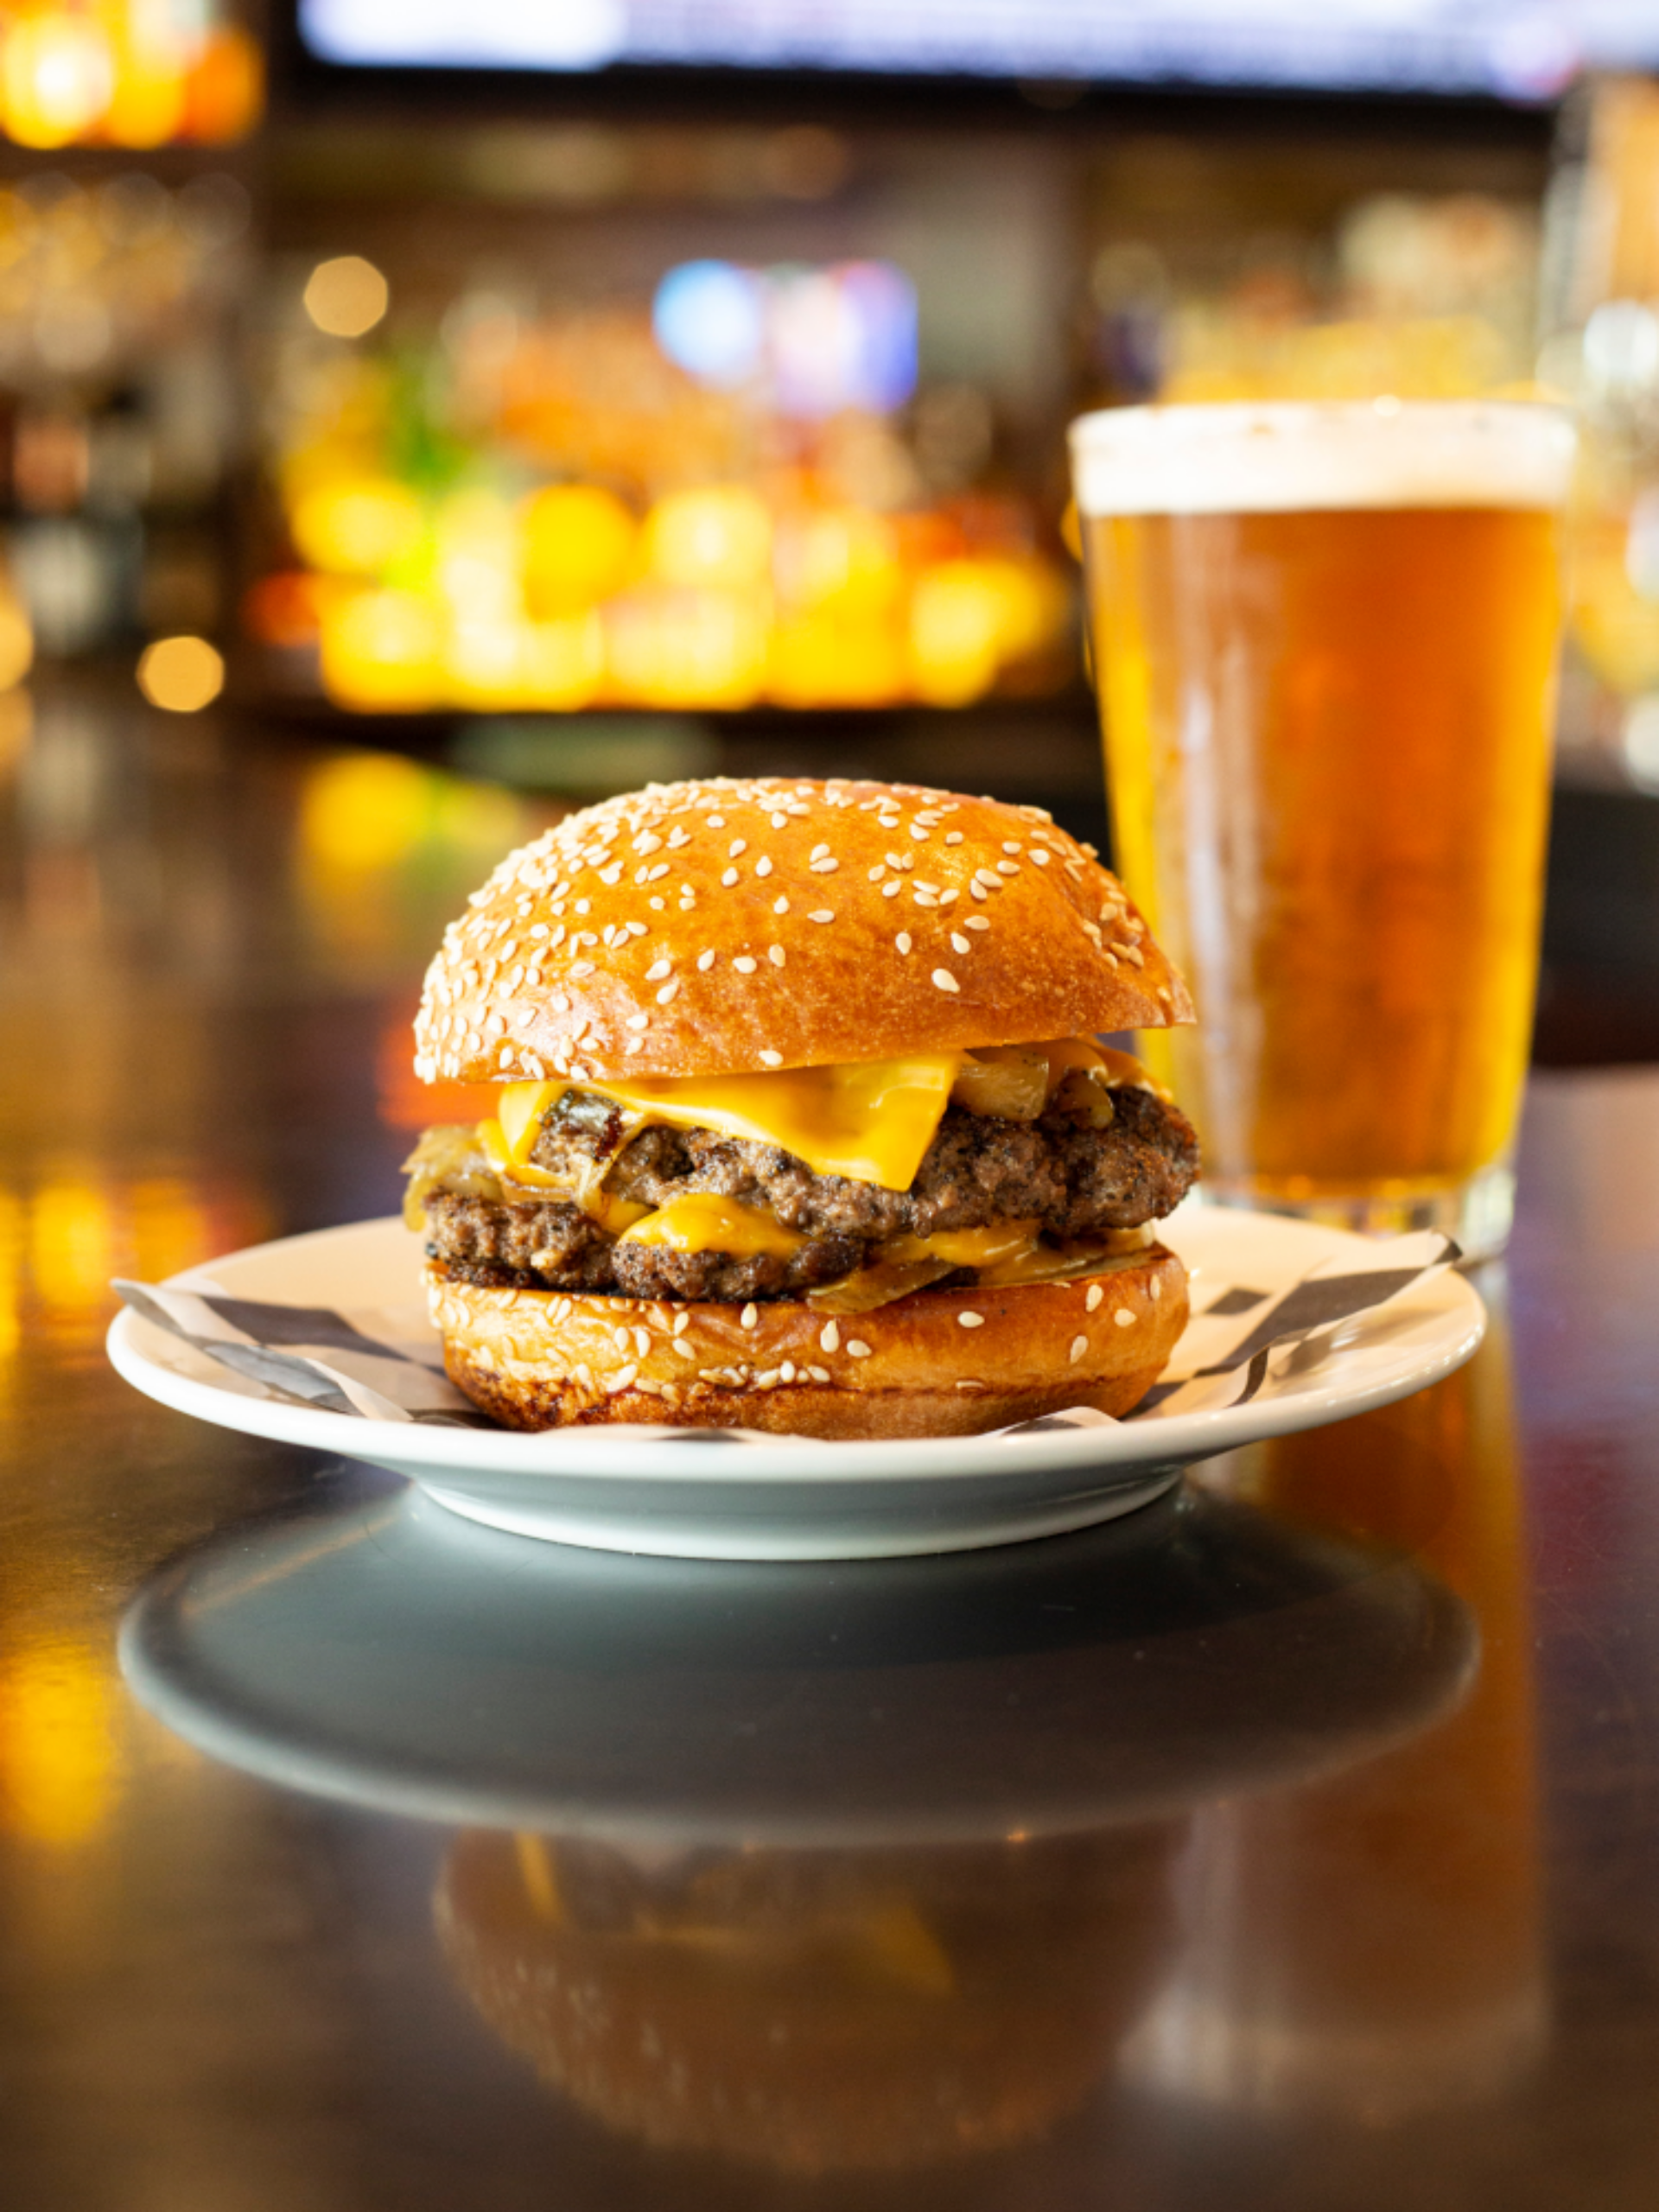 Burger on a plate with a beer in the background